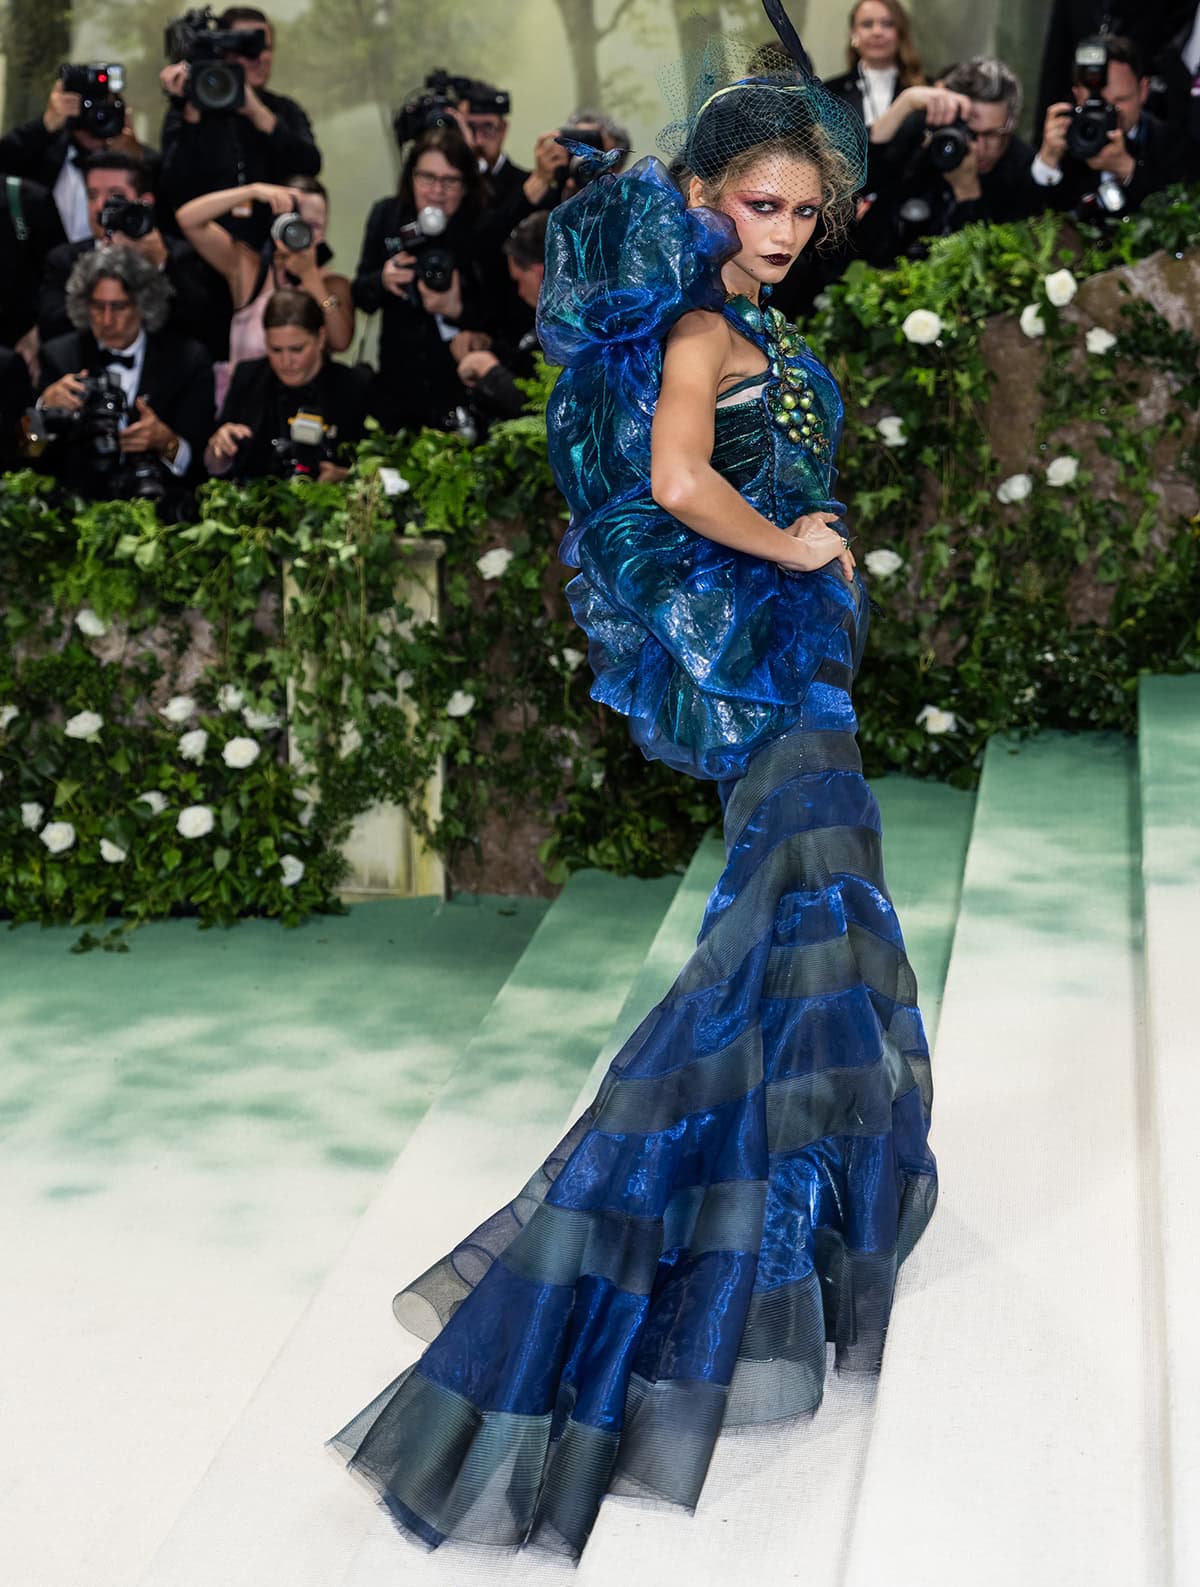 Zendaya shows off her red-carpet skill, looking villainous as she strikes fierce poses on the Met Gala steps